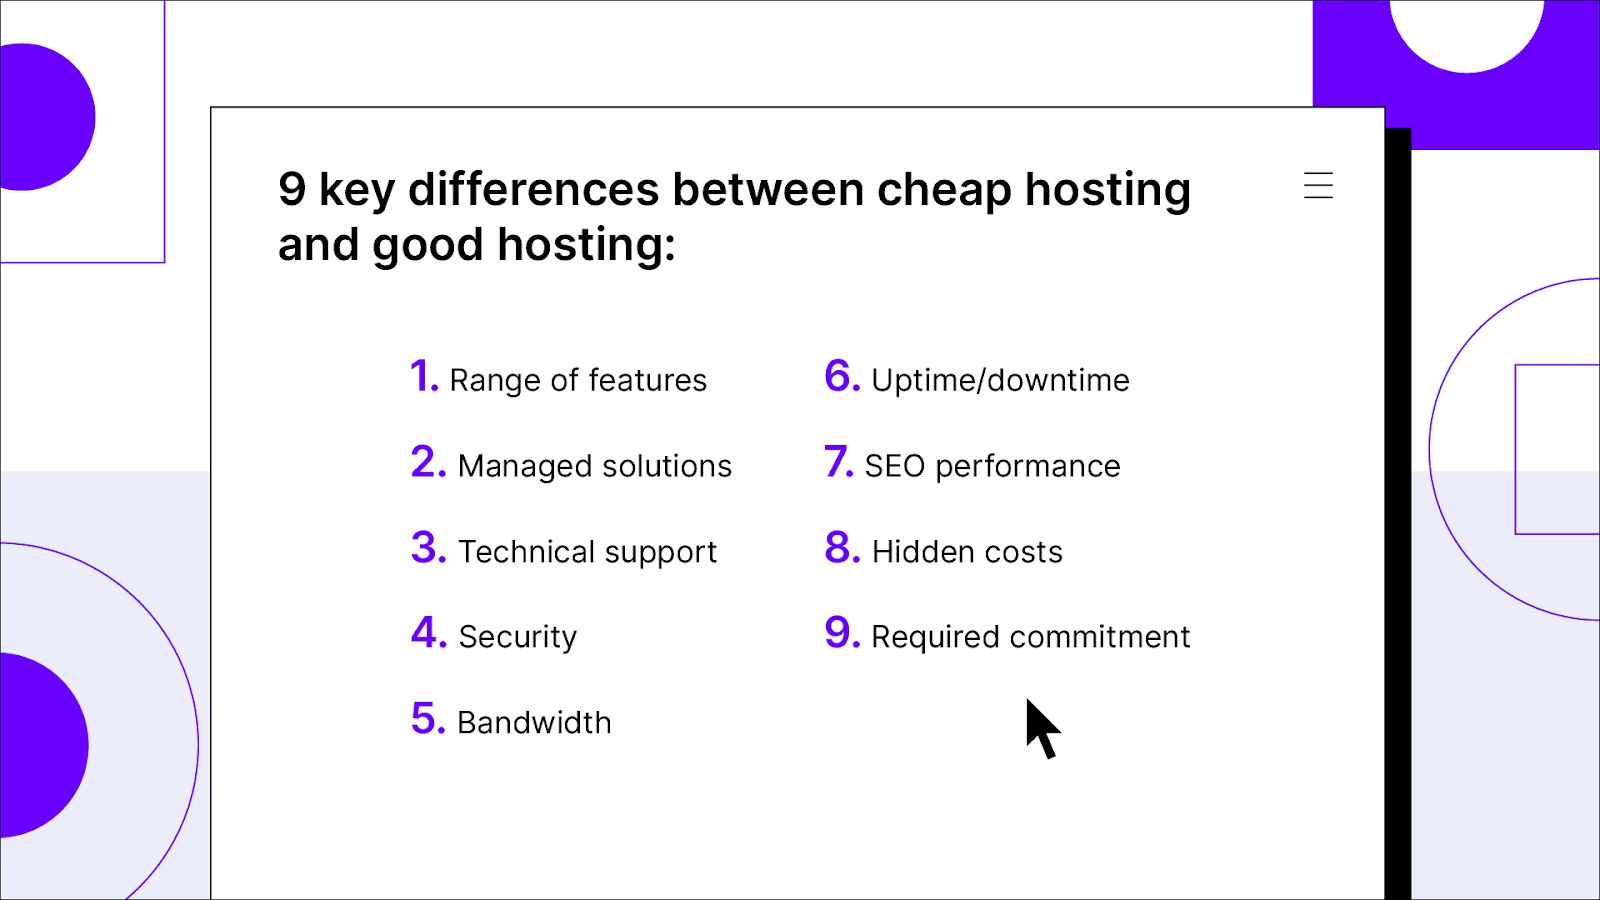 9 key differences between cheap hosting and good hosting.